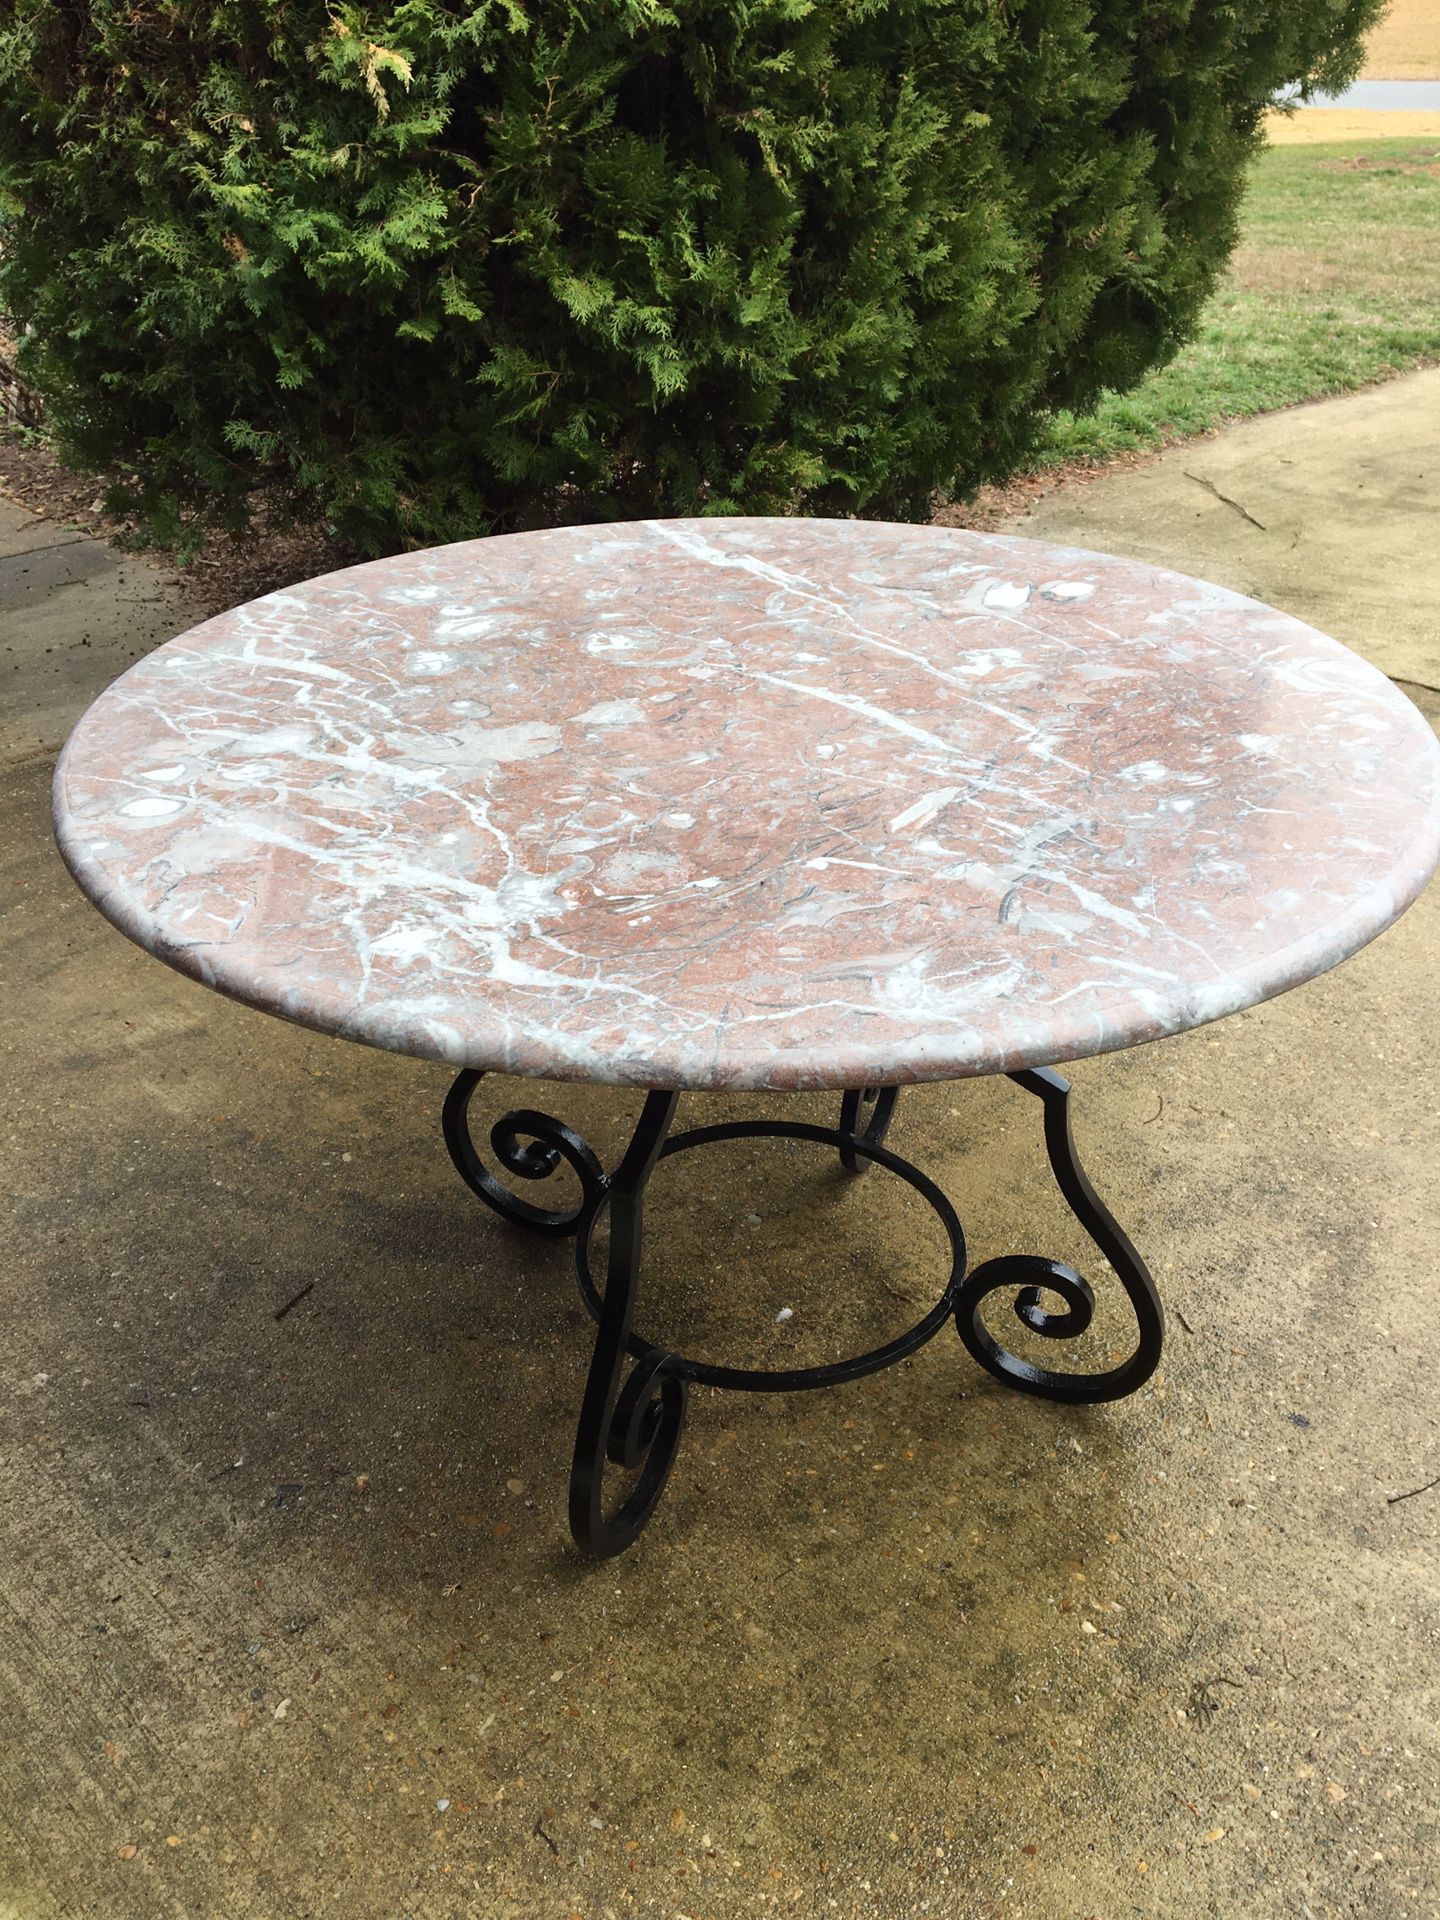 Lovely marble top table